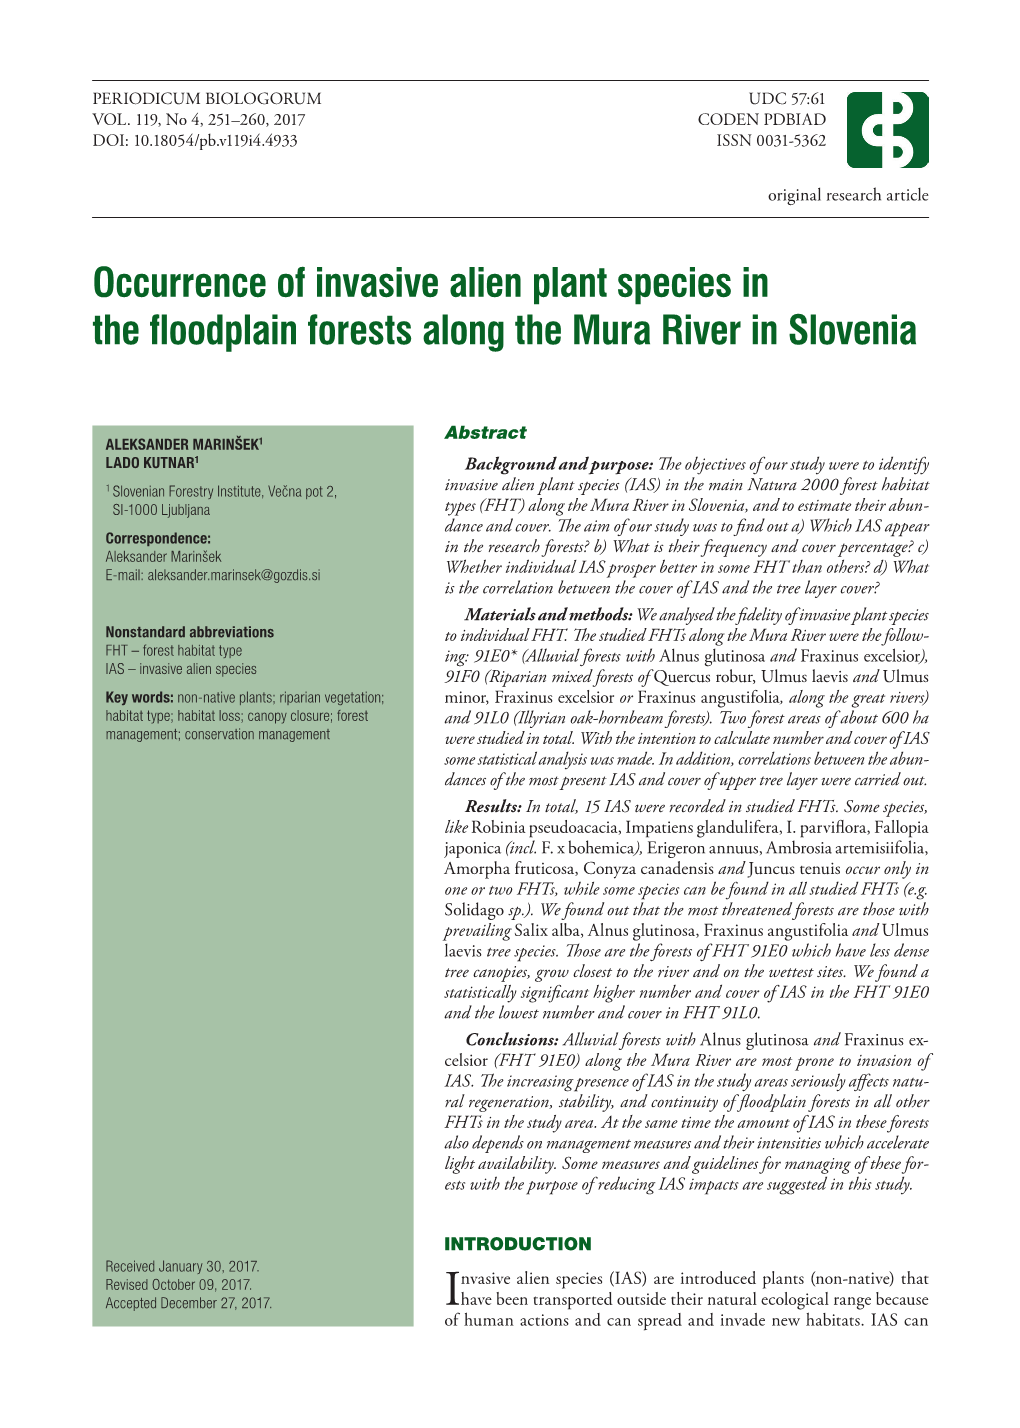 Occurrence of Invasive Alien Plant Species in the Floodplain Forests Along the Mura River in Slovenia